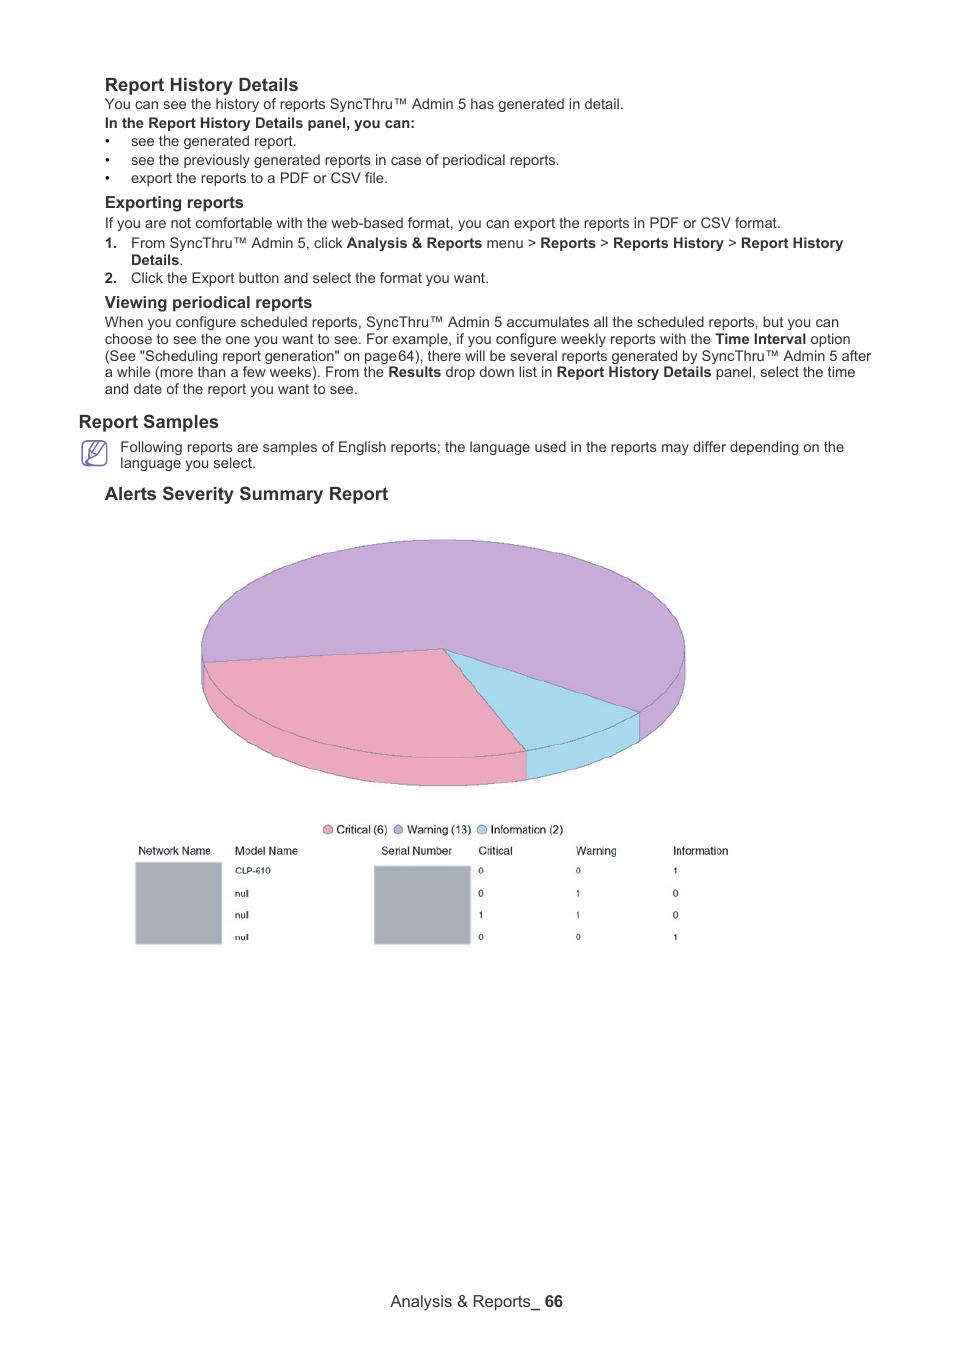 Report samples, Report history details, Alerts severity summary report | Samsung ML-3471ND-XAR User Manual | Page 66 / 111